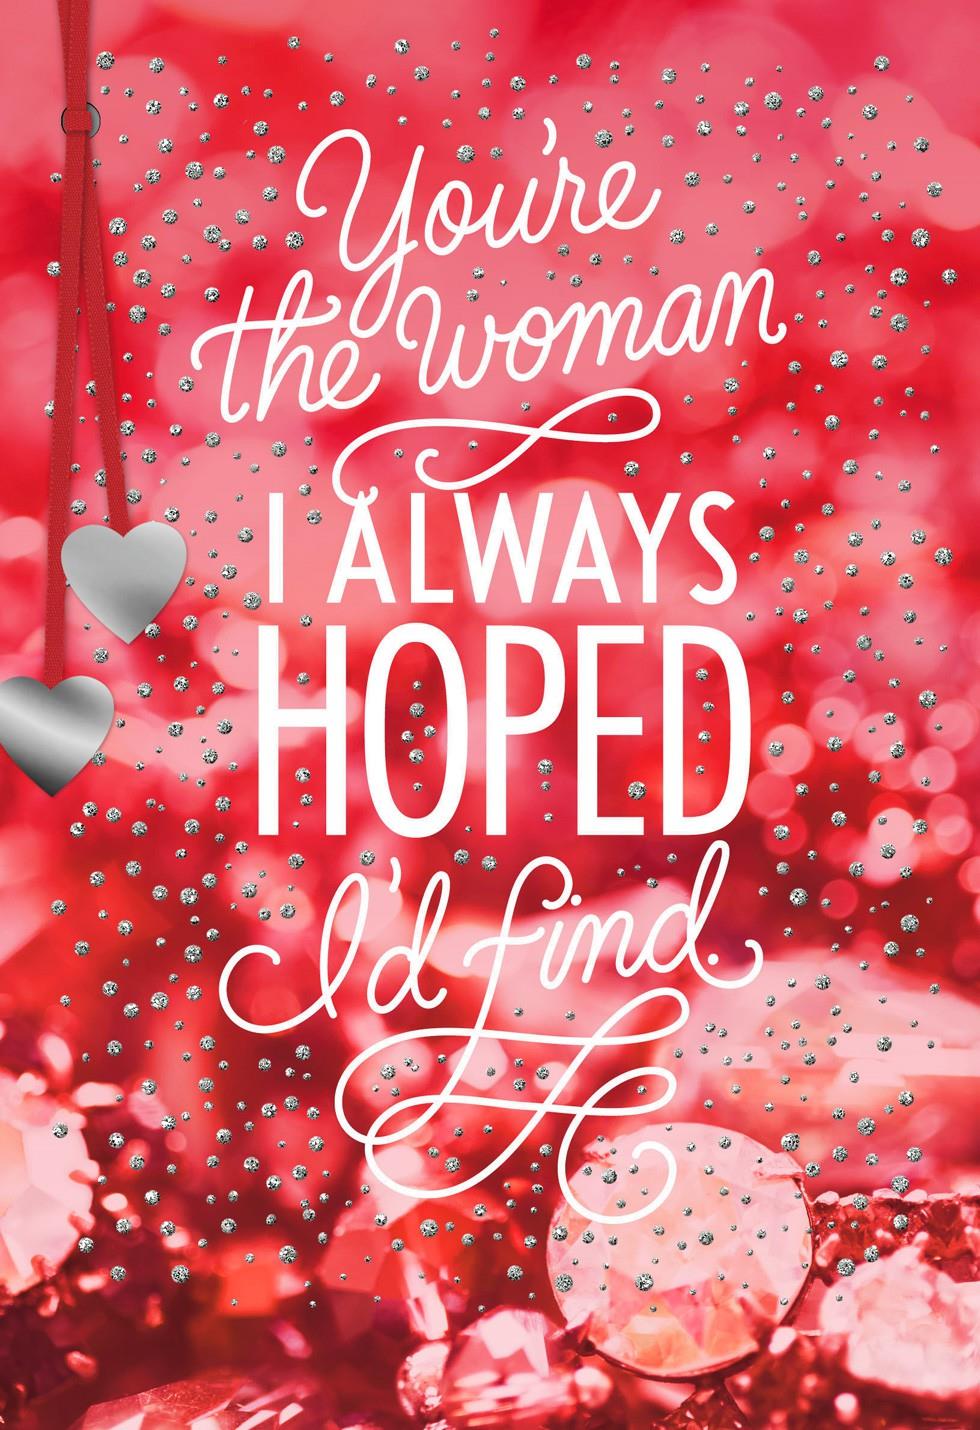 The Woman I Love Valentine's Day Card for Her - Greeting Cards - Hallmark